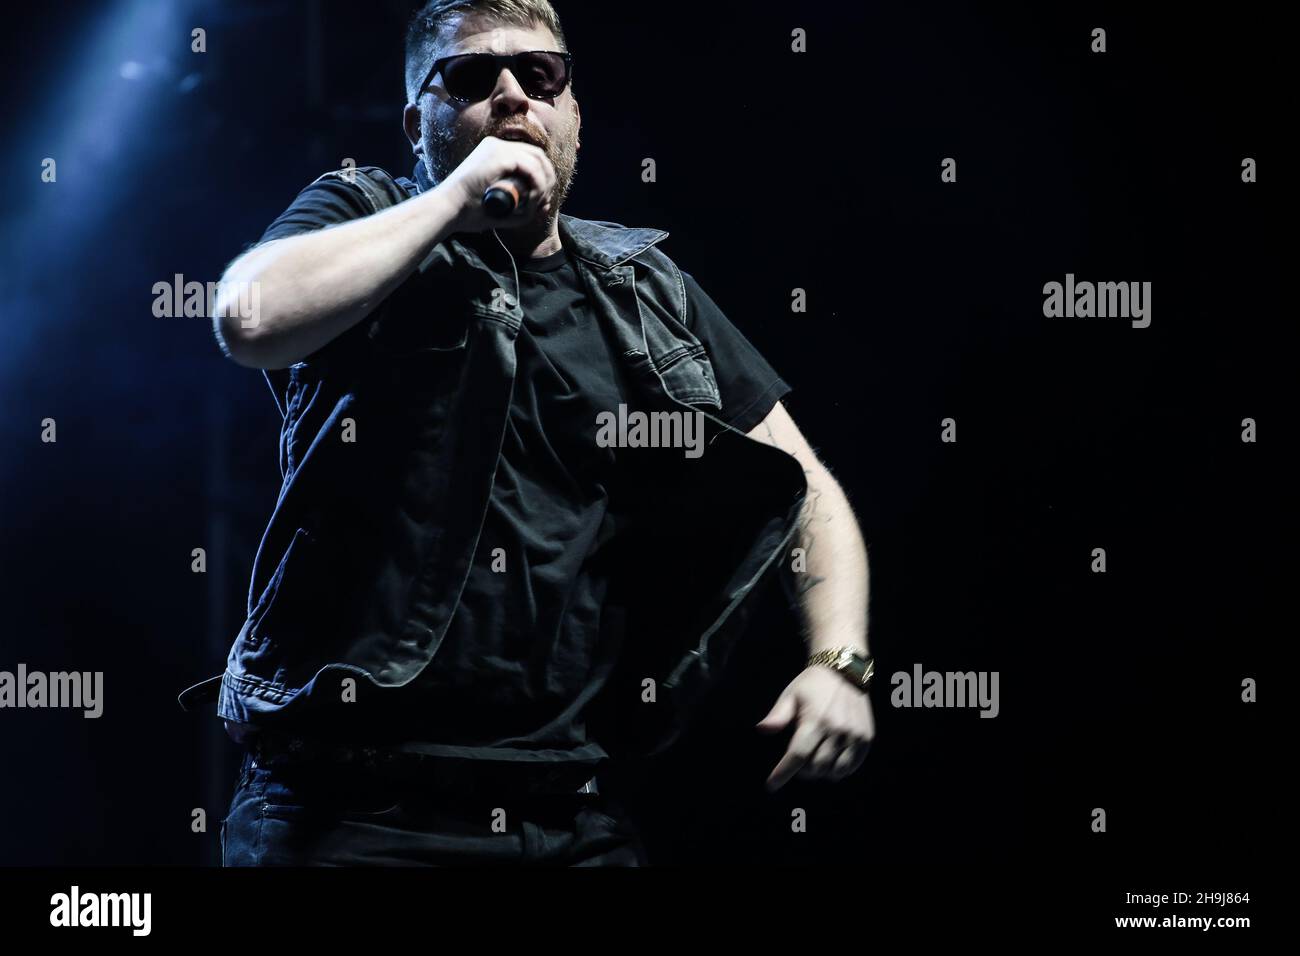 Jamie Meline (aka El-P) of Run the Jewels at the 2015 Reading Festival ...